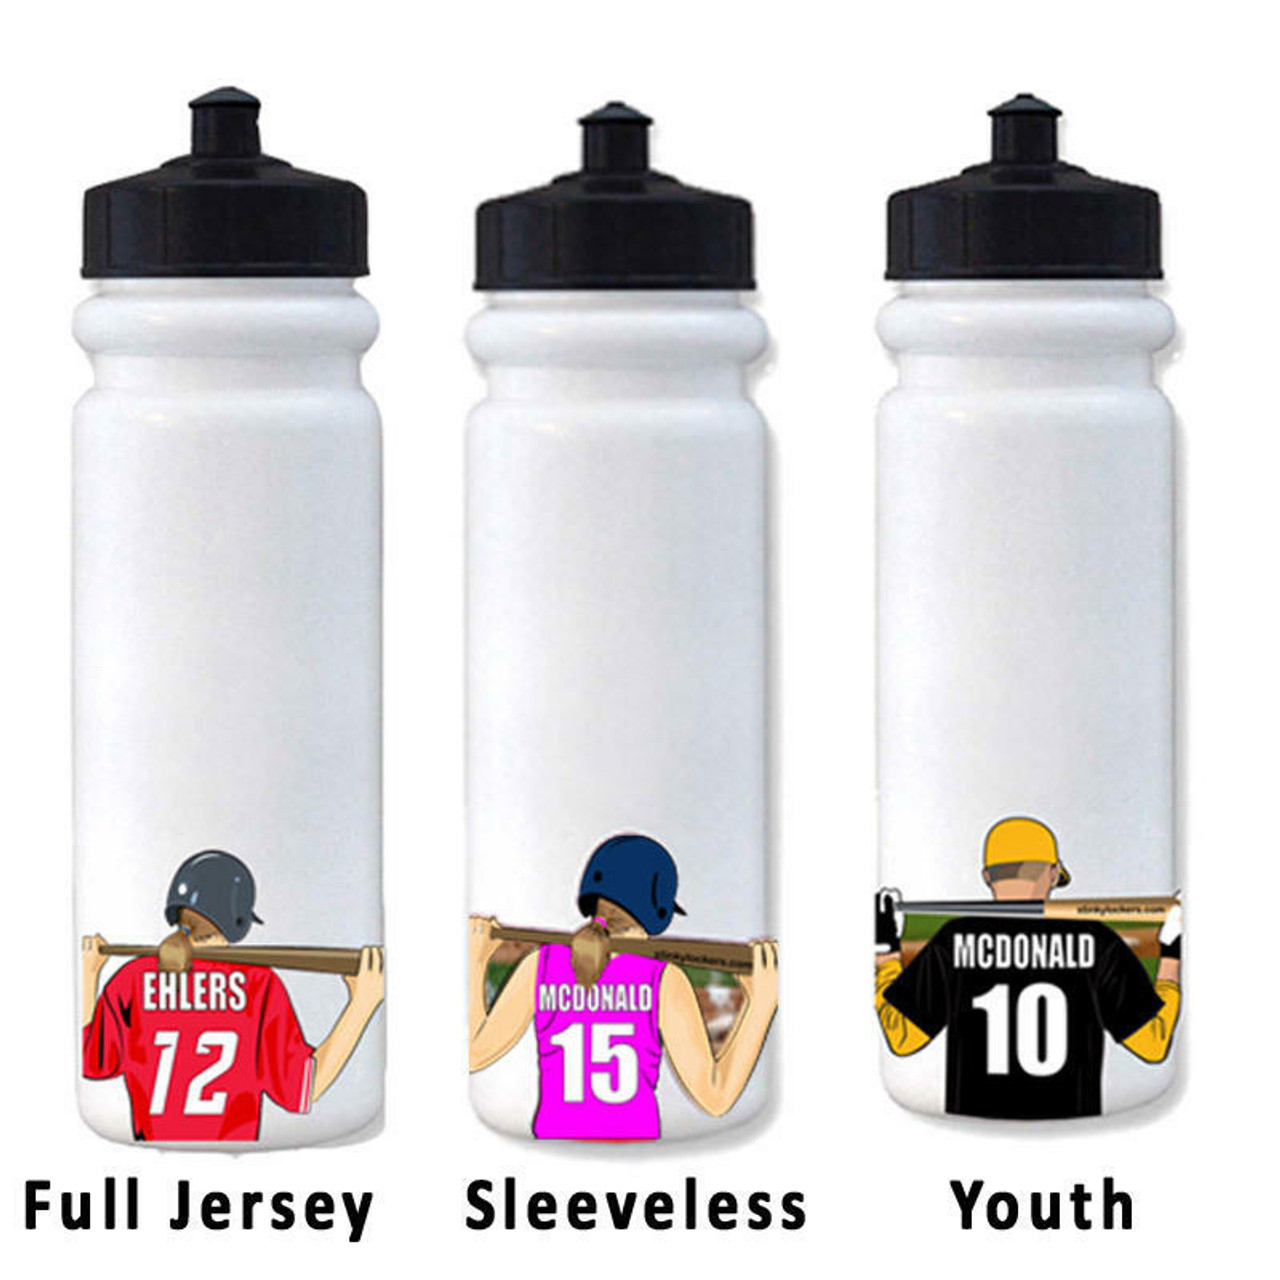 20oz Sports Water Bottles, 10 Pack, Reusable No BPA Plastic, Pull Top  Leakproof Drink Spout - Stinky Lockers Ltd.